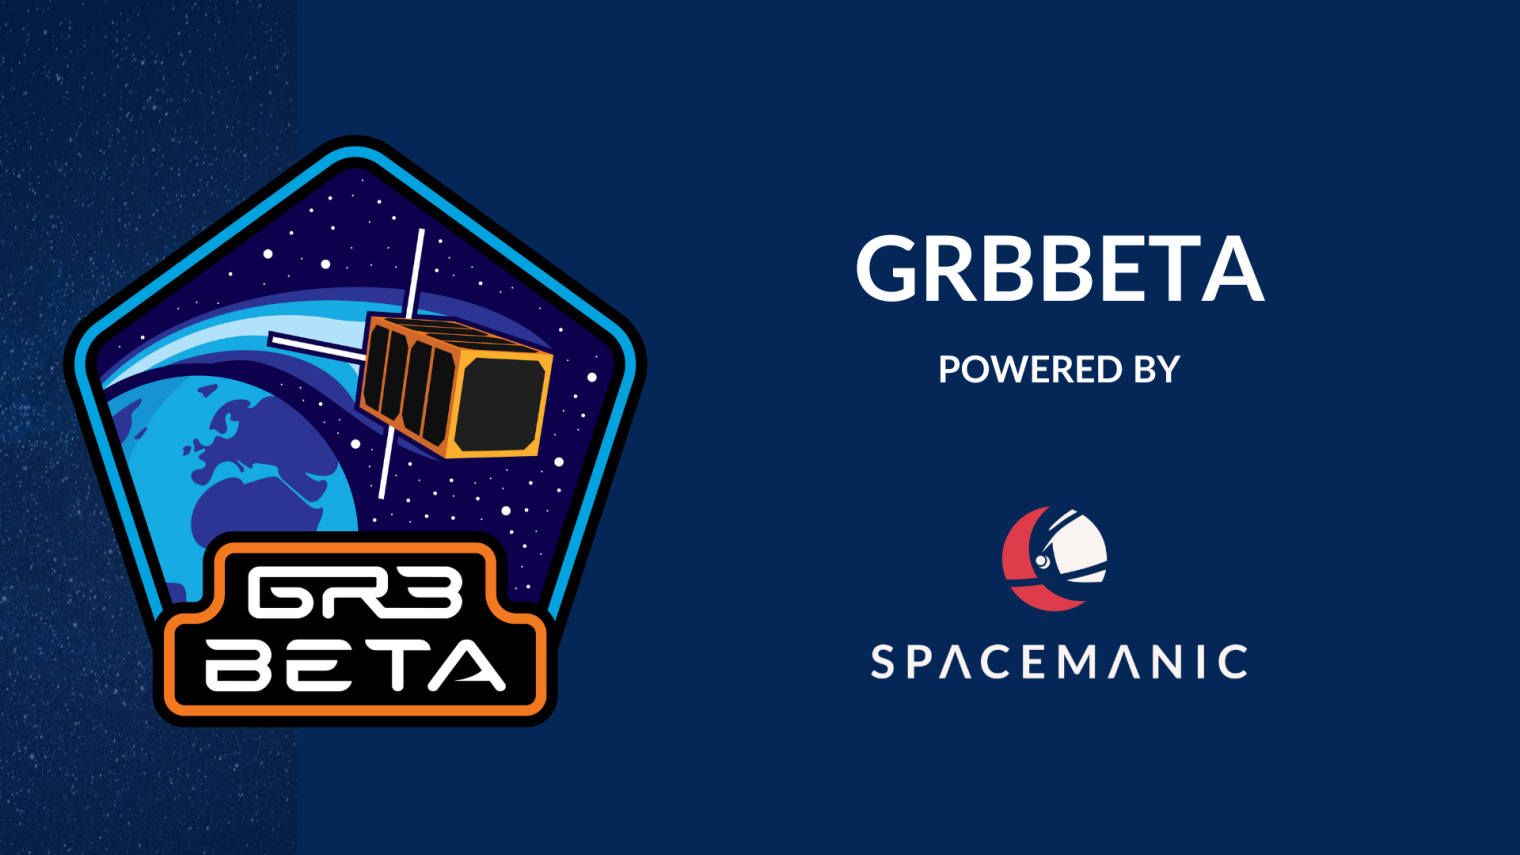 Spacemanic selected to build GRBBeta satellite: The Next Frontier in Gamma-Ray Burst Detection